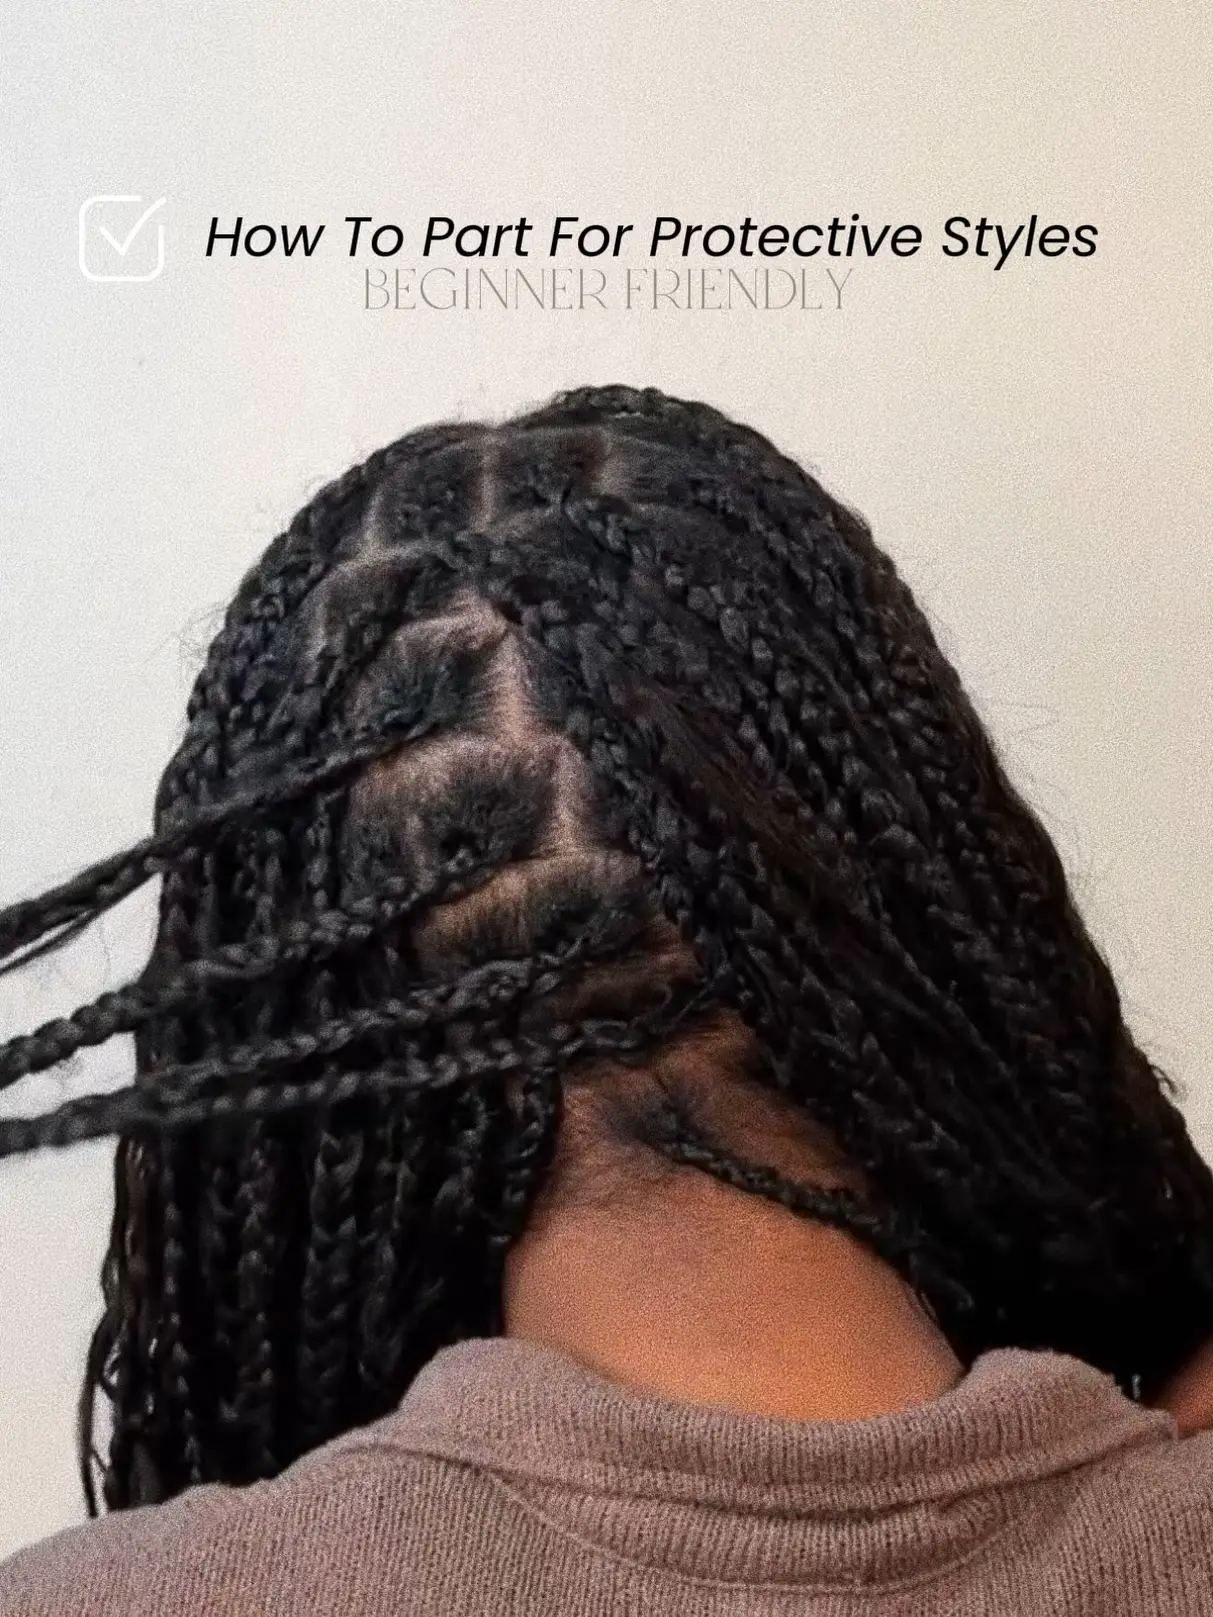 Braided Hairstyles to Try as protective styling for natural hair  #protectivestyling